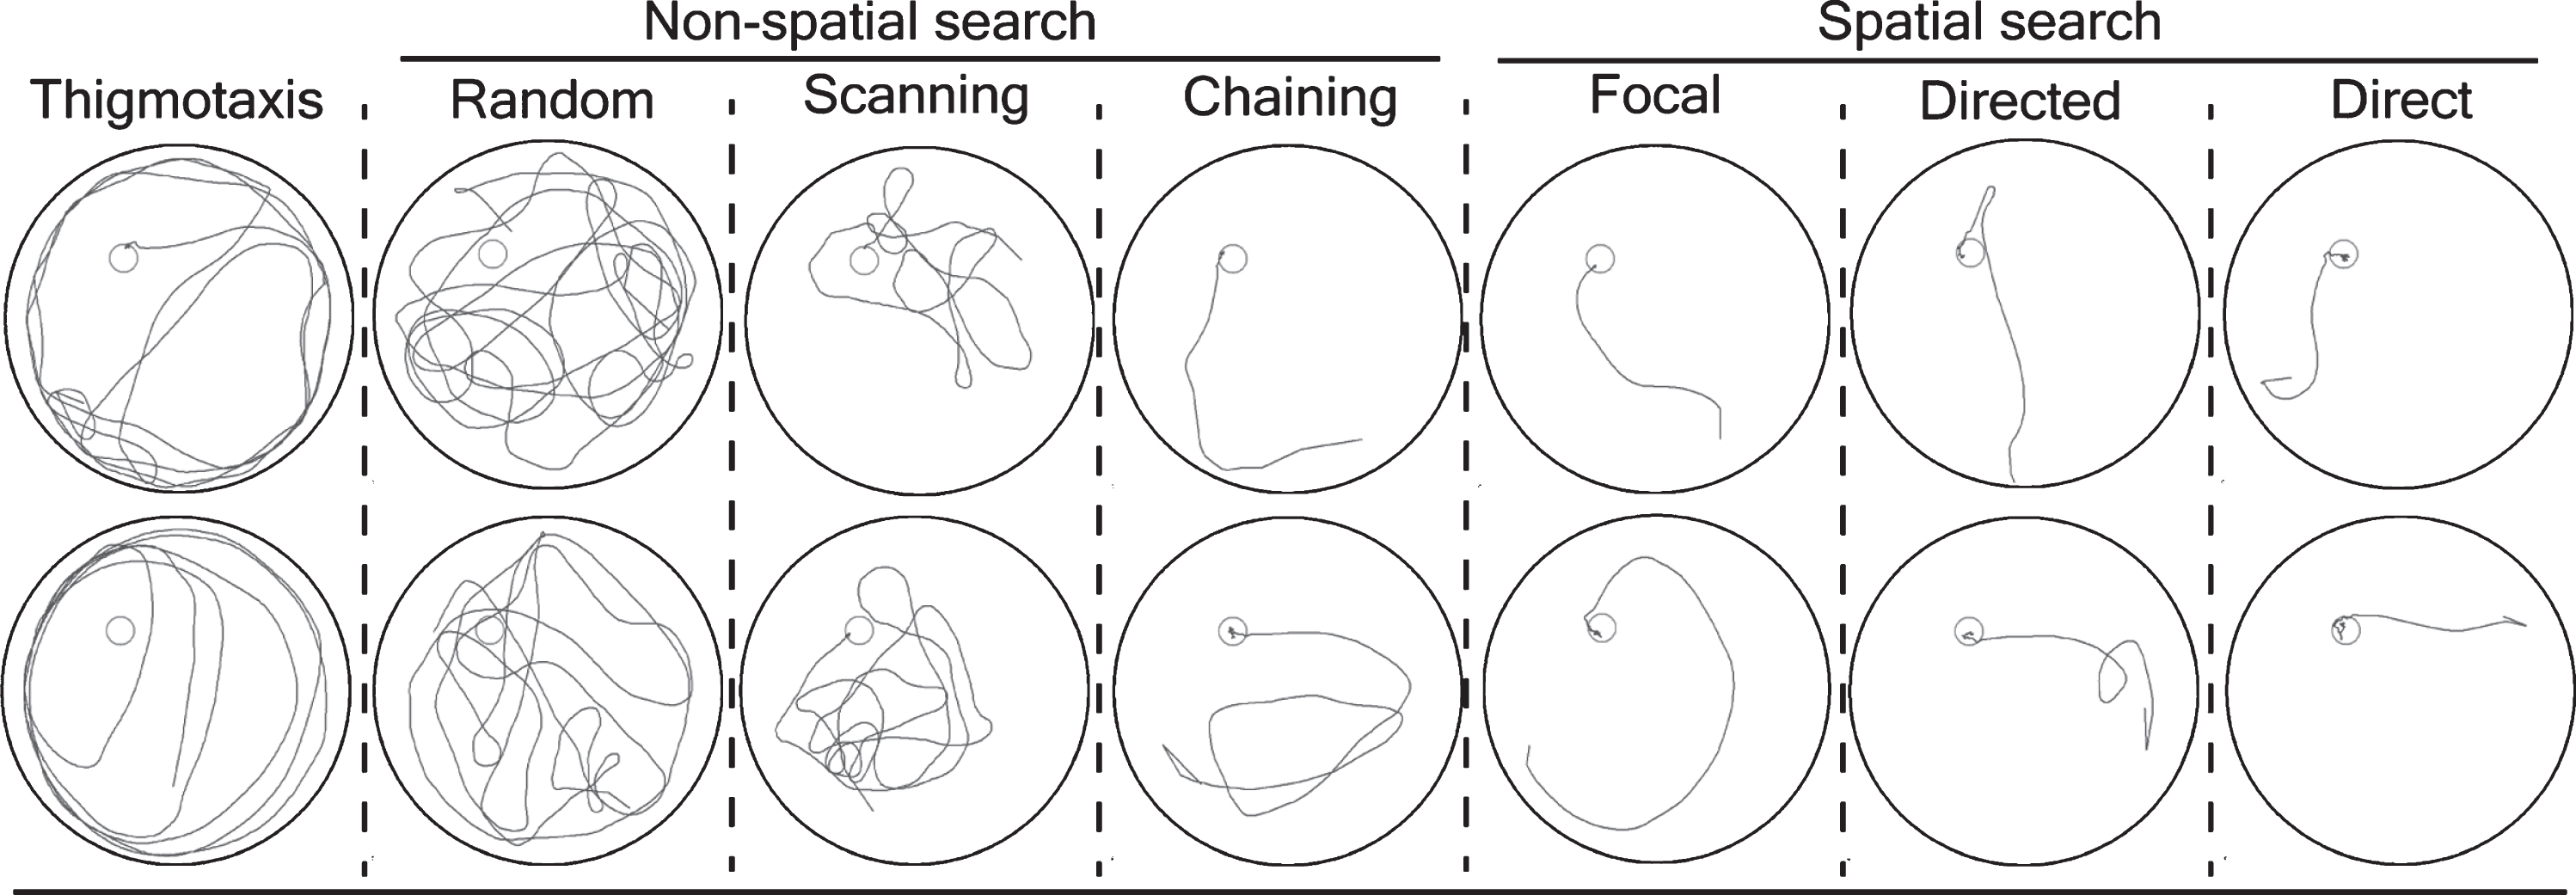 Classification of a mouse trajectory into search strategies. The software algorithm defines the following nine search strategies: thigmotaxis: >35% of time (90 s) within closer wall zone (10 cm from the pool wall) and <65% time in wider wall zone (16 cm from the pool wall); random search: >70% surface coverage; scanning: <70% surface coverage, >15% surface coverage, and <0.7 standardized mean distance to the pool center; chaining: >65% of time within the annulus zone; perseverance: <0.45 standardized error body angle, <0.40 standardized mean distance to the previous goal; directed search: >80% of time in the goal corridor; focal search: <0.35 standardized error body angle, <0.25 standardized mean distance to the present goal; and direct swim: 100% in the goal corridor; unclassified: the algorithm could not classify into above mentioned categories. We further grouped the search strategies into thigmotaxis, non-spatial search strategies (random, scanning, and chaining) and spatial search strategies (focal, directed, and direct). Each column in the figure is a discrete search strategy that consists of two representative mice trajectories (blue lines) from training trials for visualization. The platform is represented by a red circle. Note: The details of key words described can be found in BIOBSERVER water maze manual.